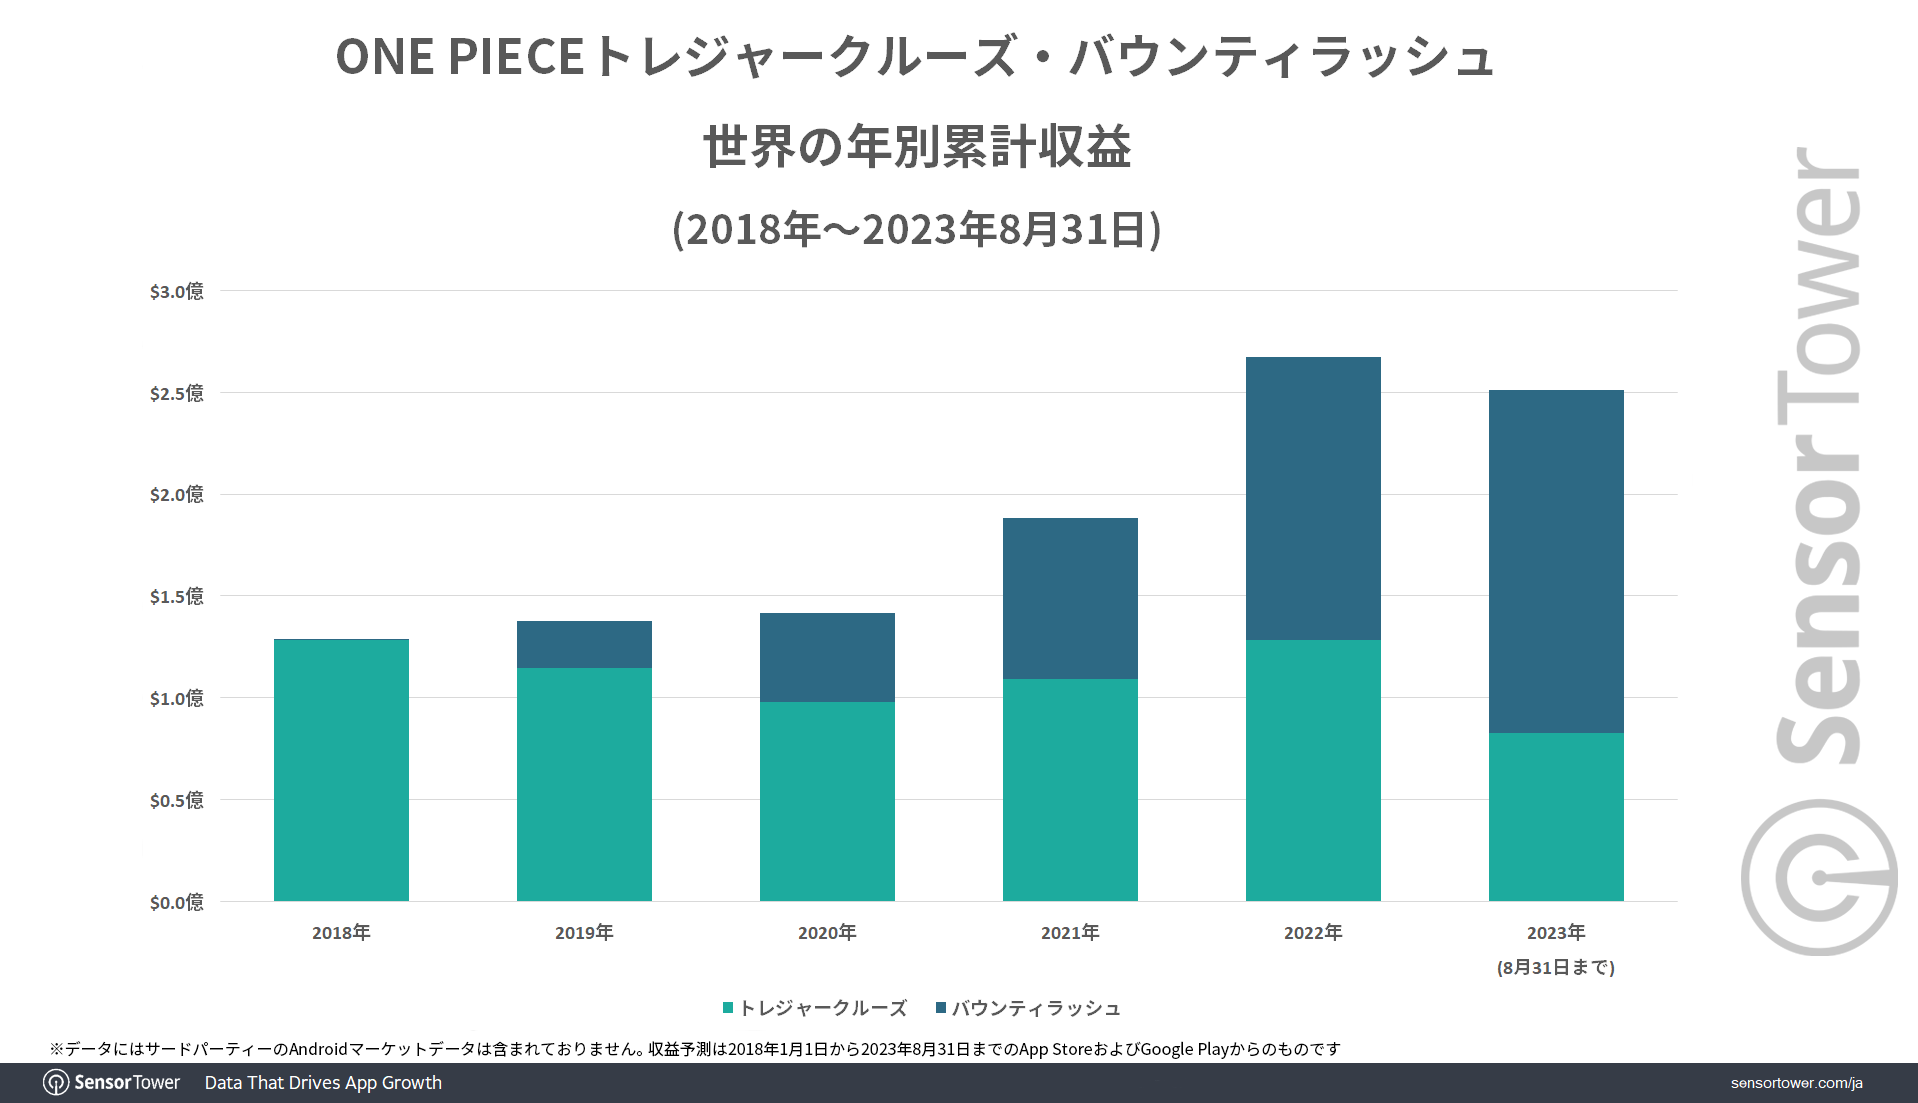 Total-Revenue-ONEPIECE-Titles